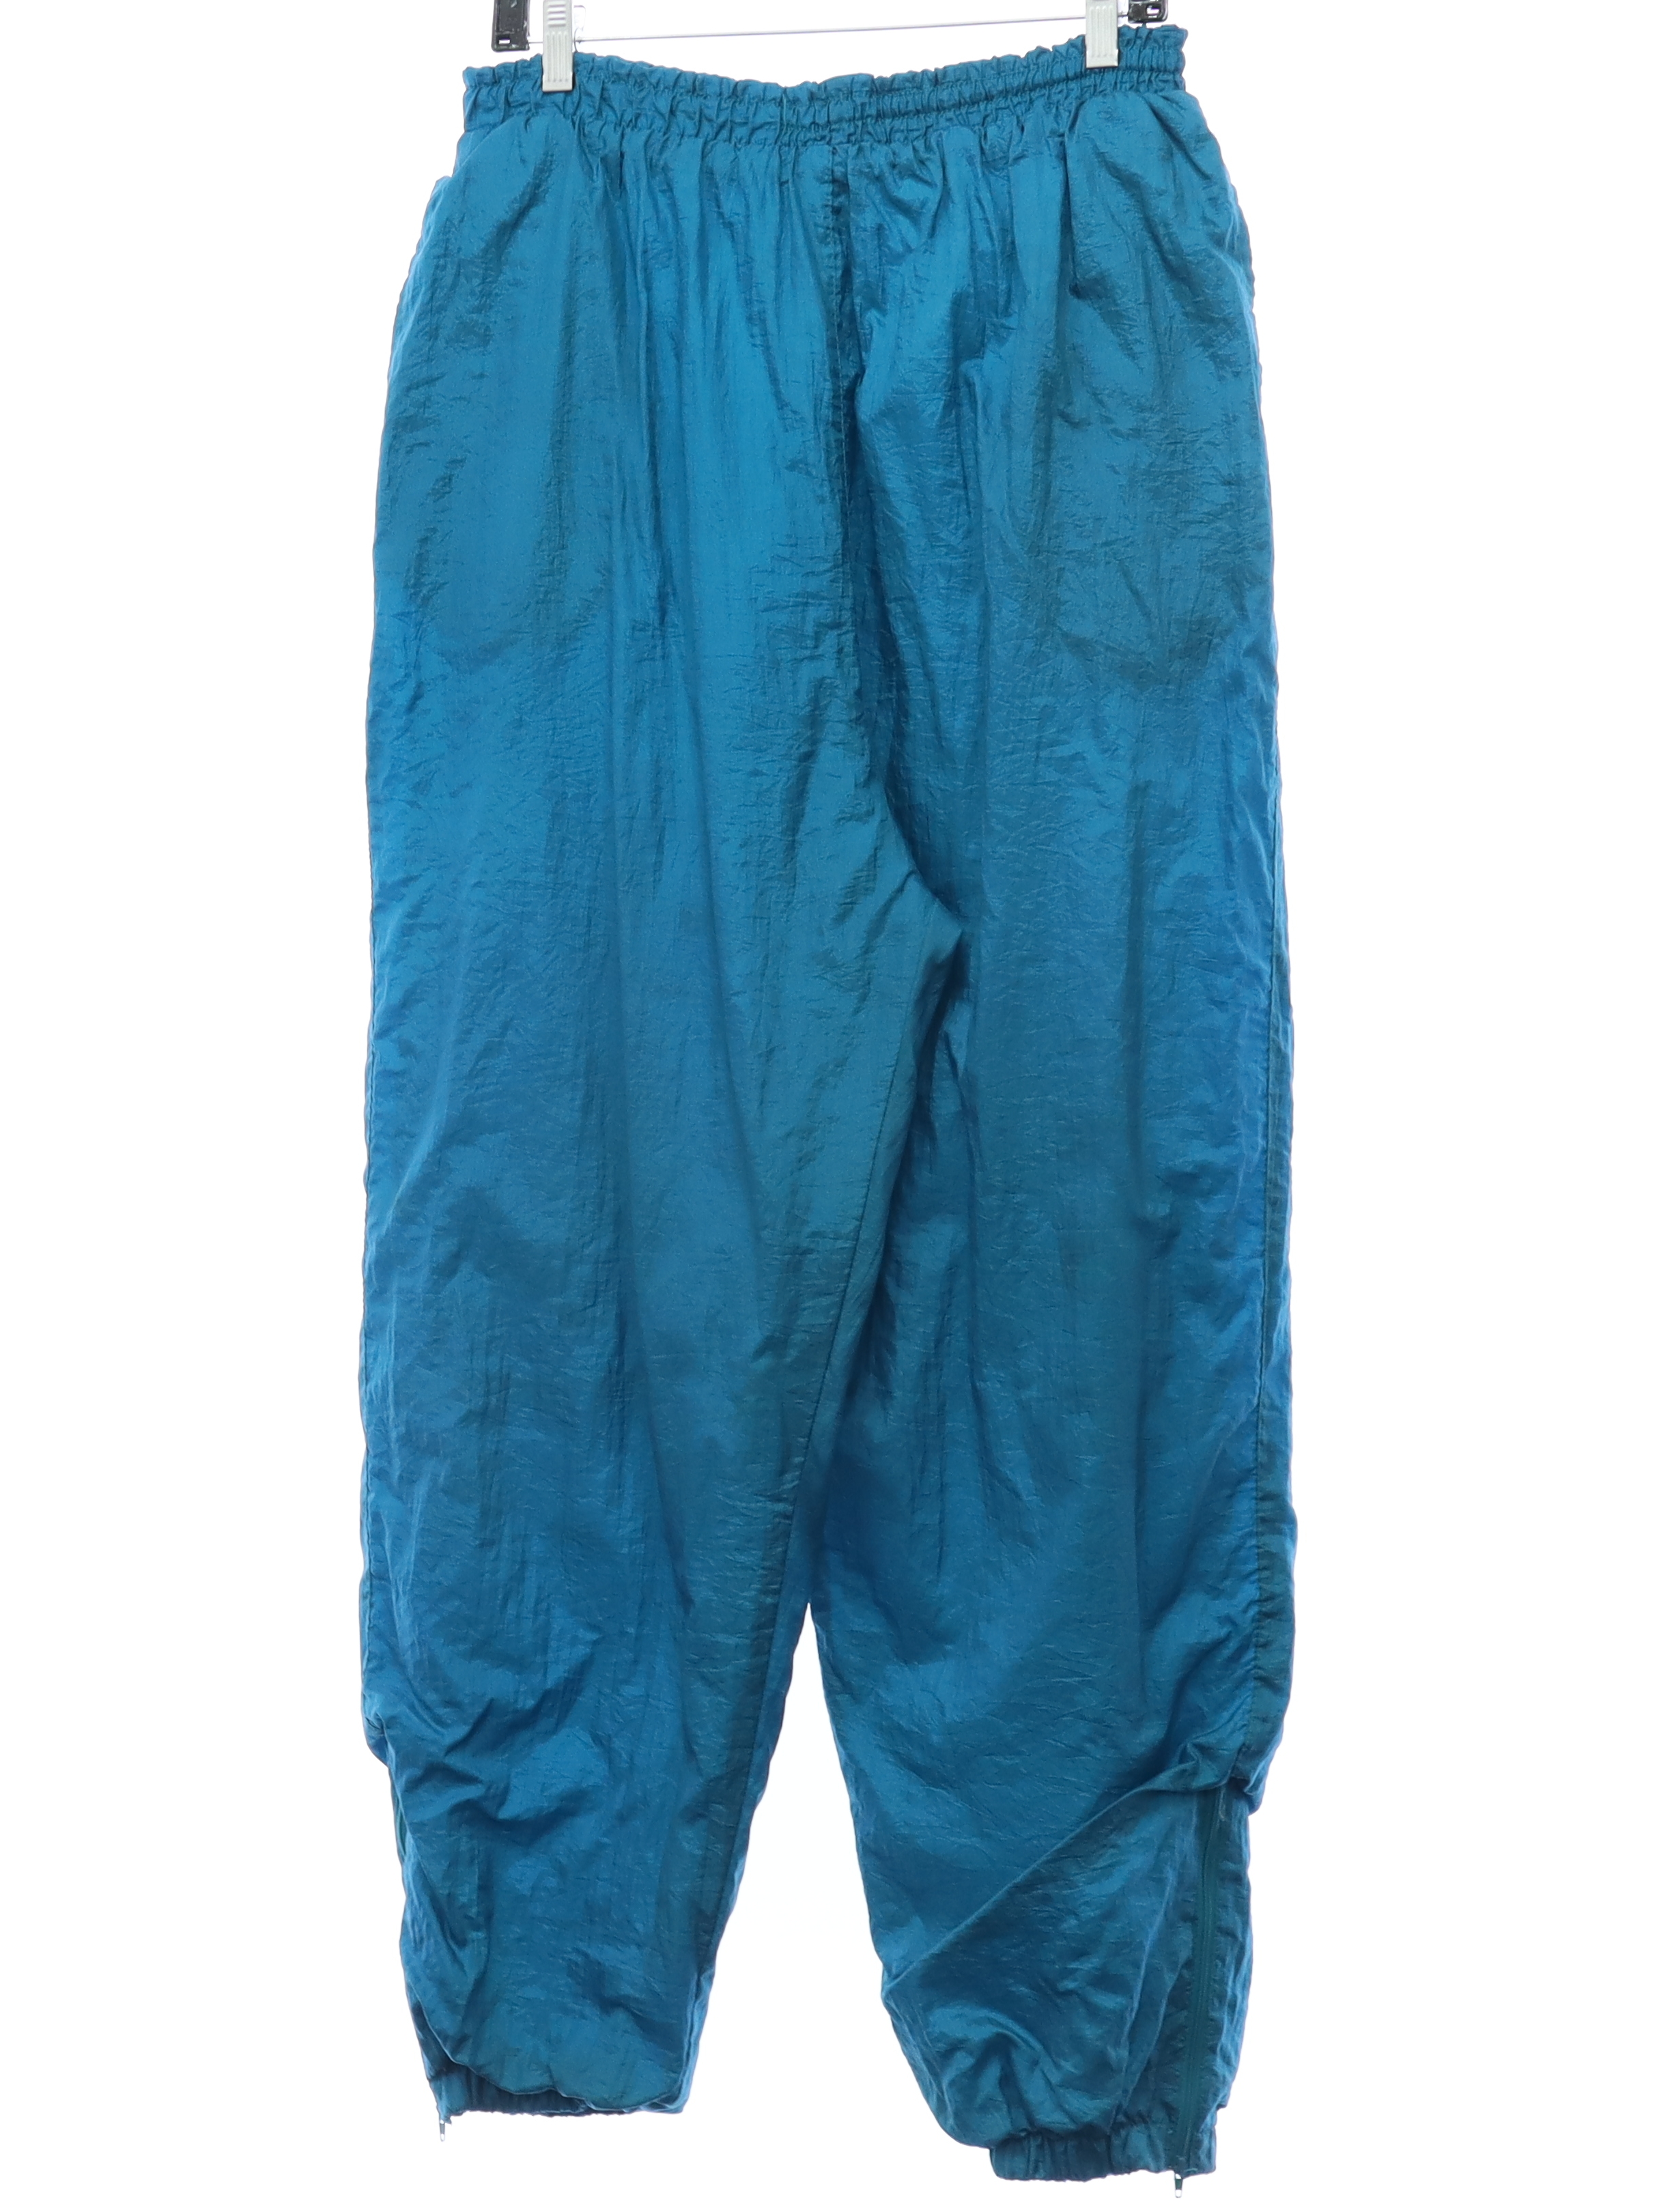 Retro 80s Pants (Basic Editions) : 80s style (made in 90s) -Basic Editions-  Womens teal-blue crinkled nylon shell track pants. Elastic pull on  waistband with front inside drawstring ties, inset side pockets